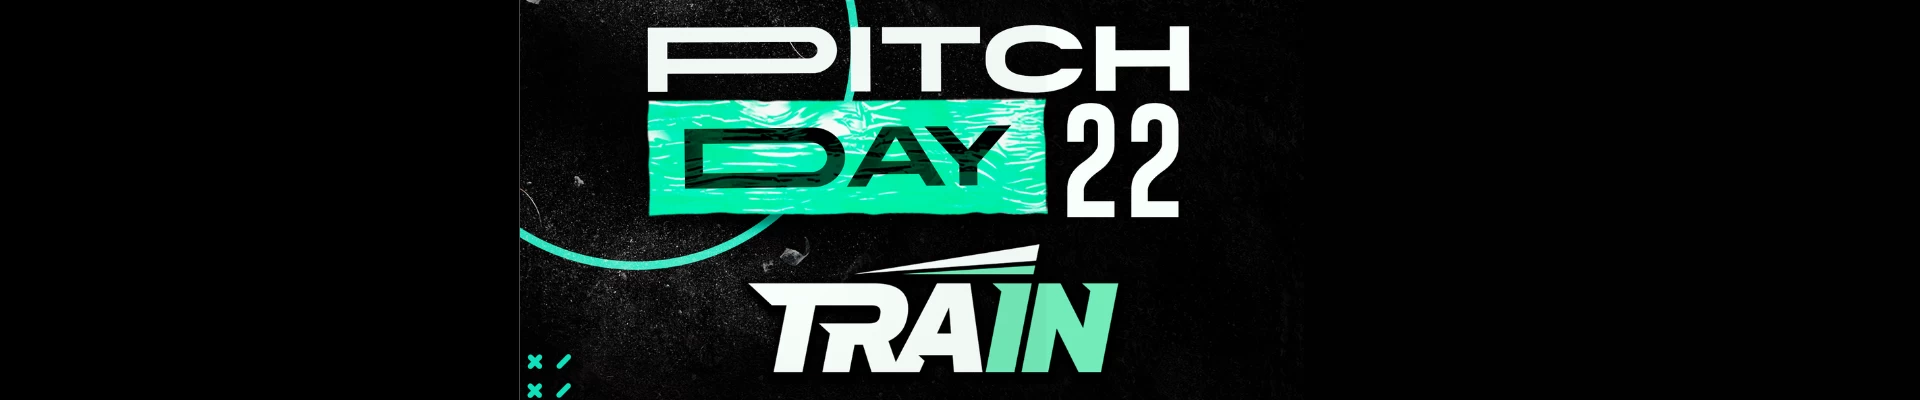 PitchDay TRAIN